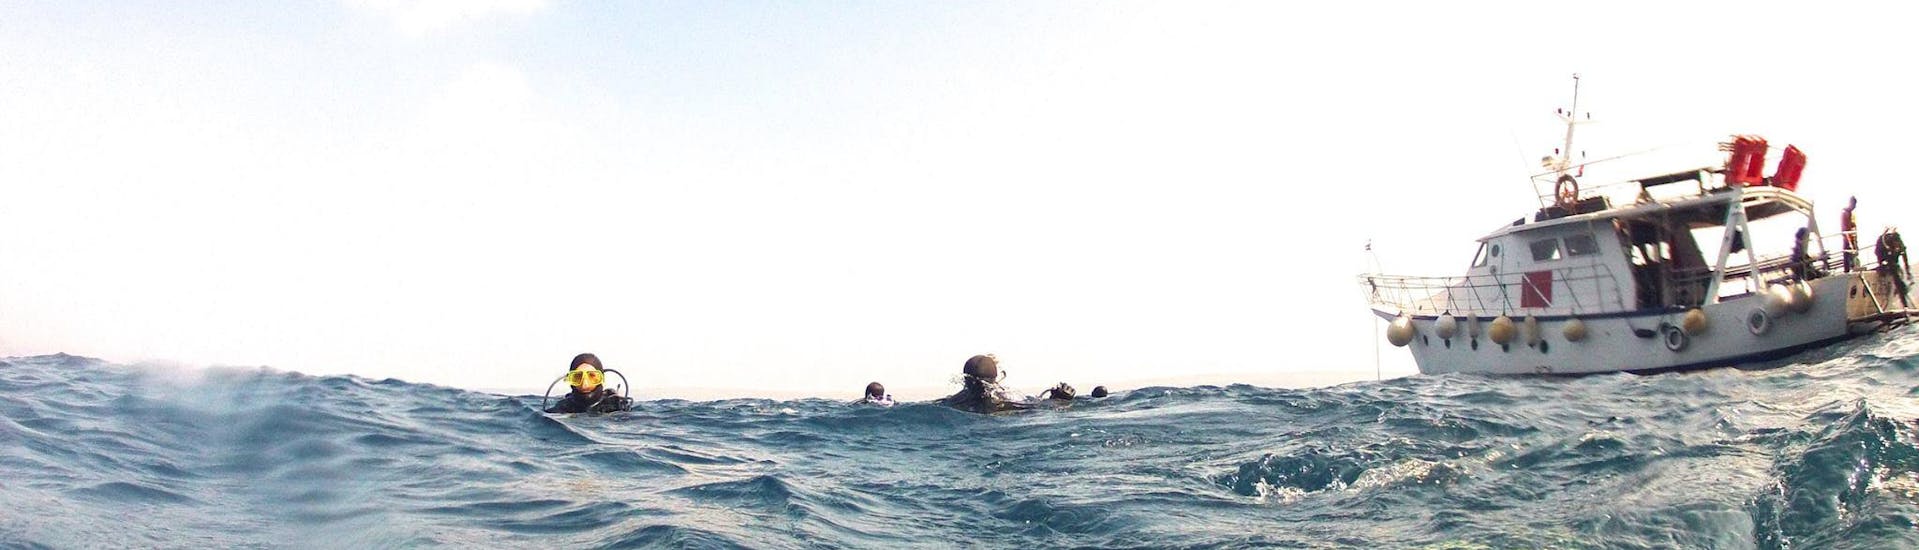 Participants swim in the water in front of the boat during a trial dive in the Kvarner Bay with Dive Center Krk.